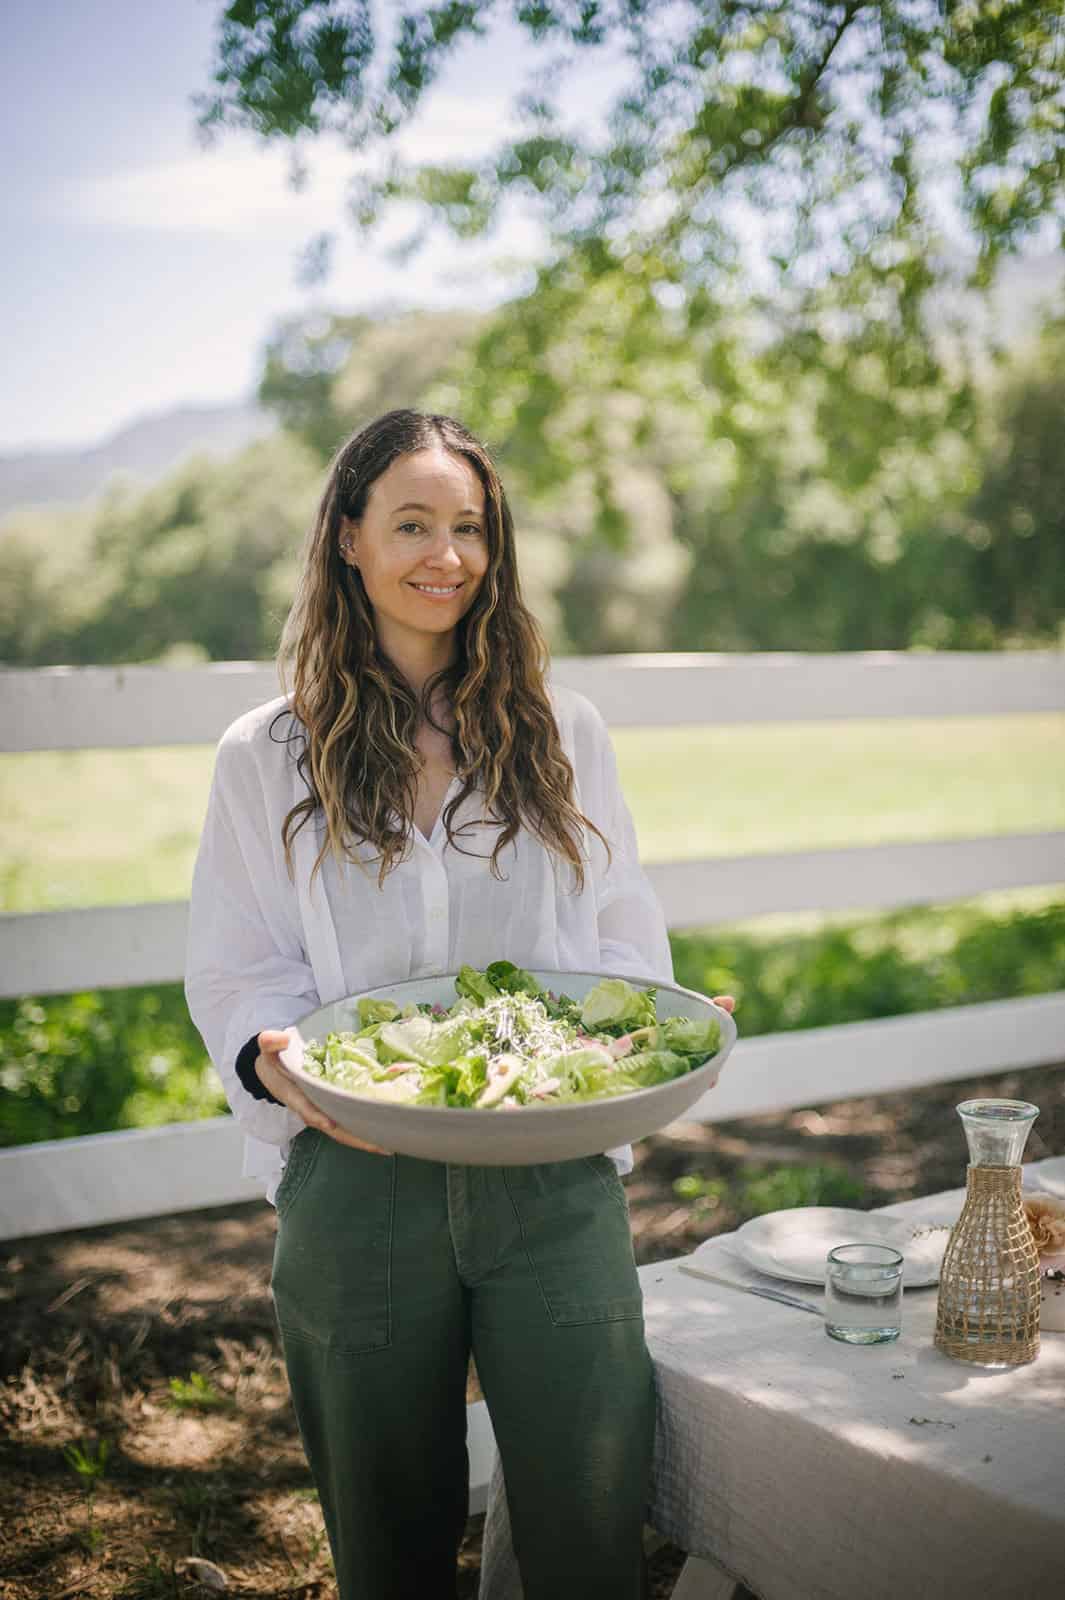 If you follow along on Instagram, you might have seen snippets from my recent trip to Santa Ynez in southern California as we celebrated the launch of Pacific Natural by Jenni Kayne. Today I am excited to share more details and photos! 